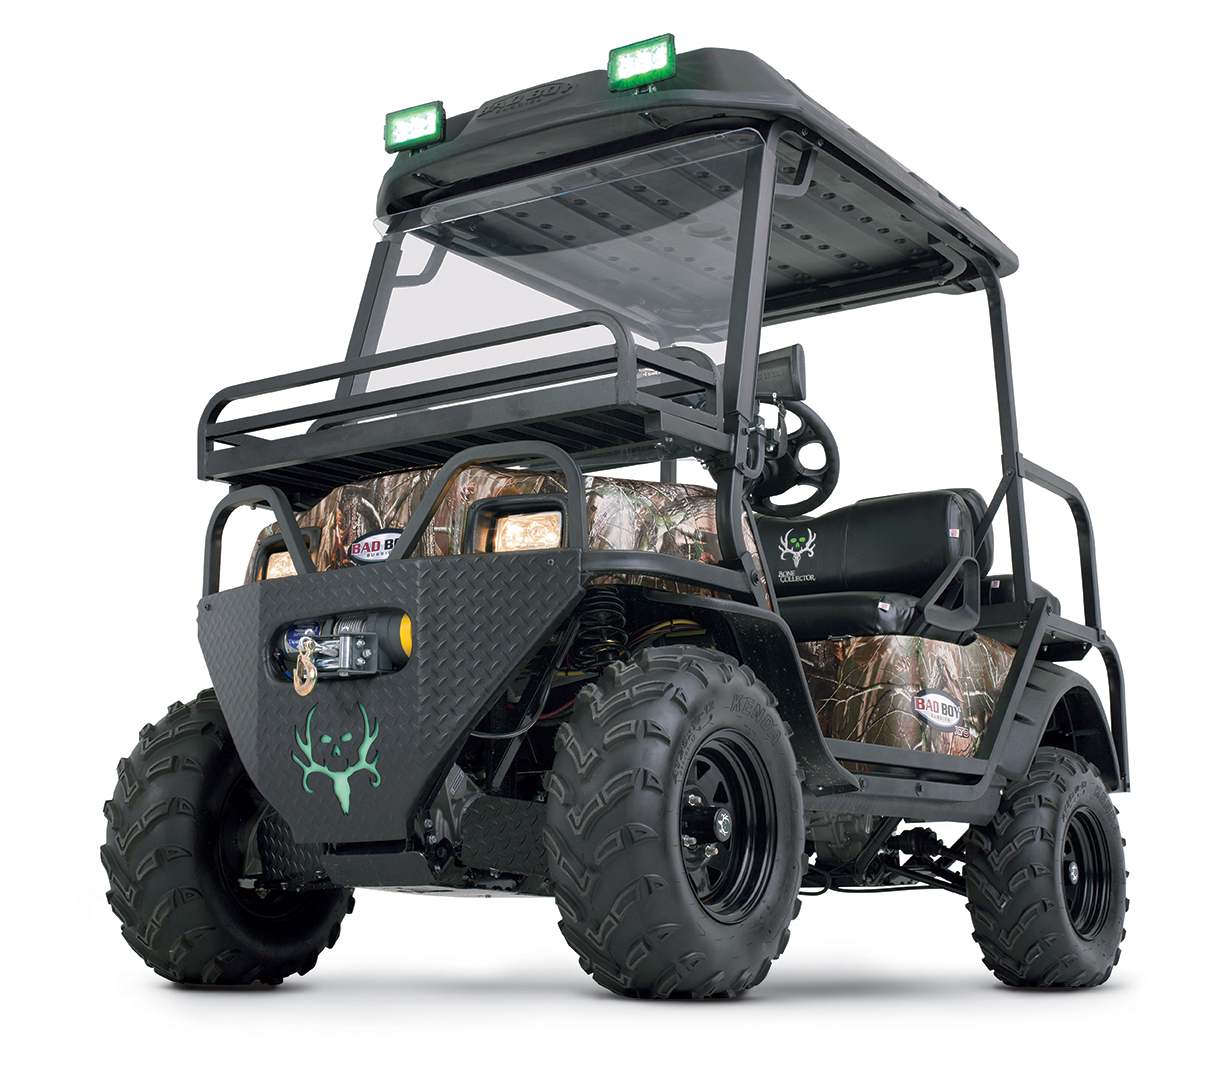 Textron Specialized Vehicles Recalls Bad Boy OffRoad Utility Vehicles